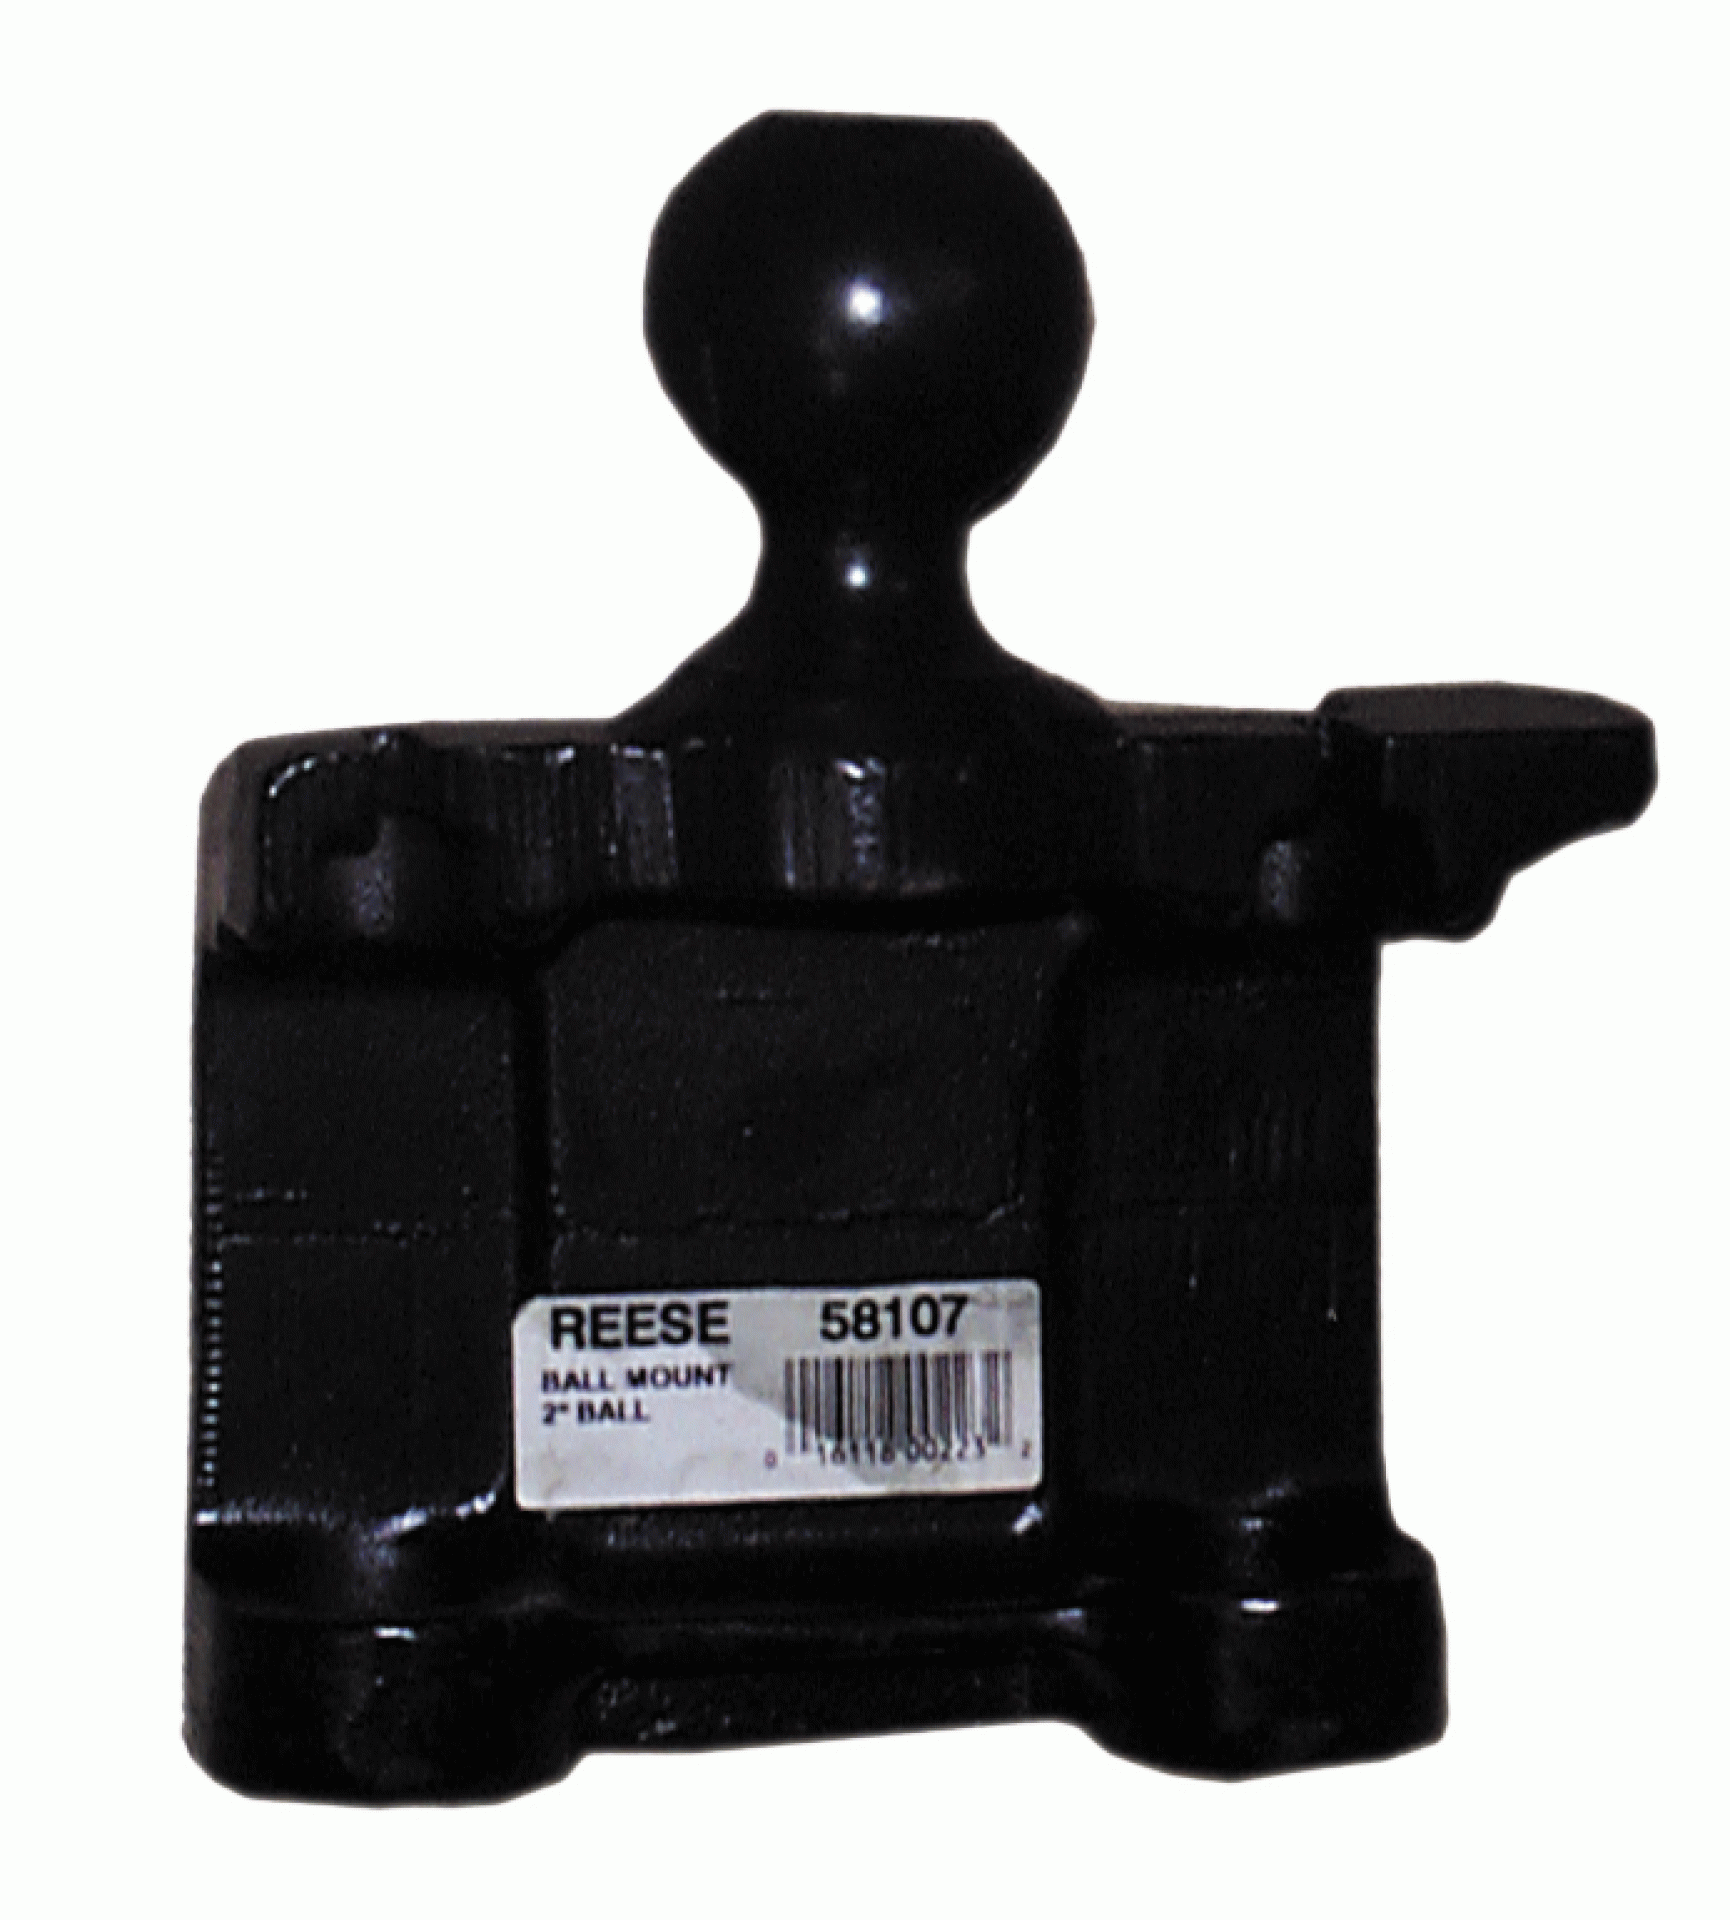 REESE | 58107 | BALL MOUNT WITH 2 INCH BALL FOR 350 MINI WEIGHT DISTRIBUTION